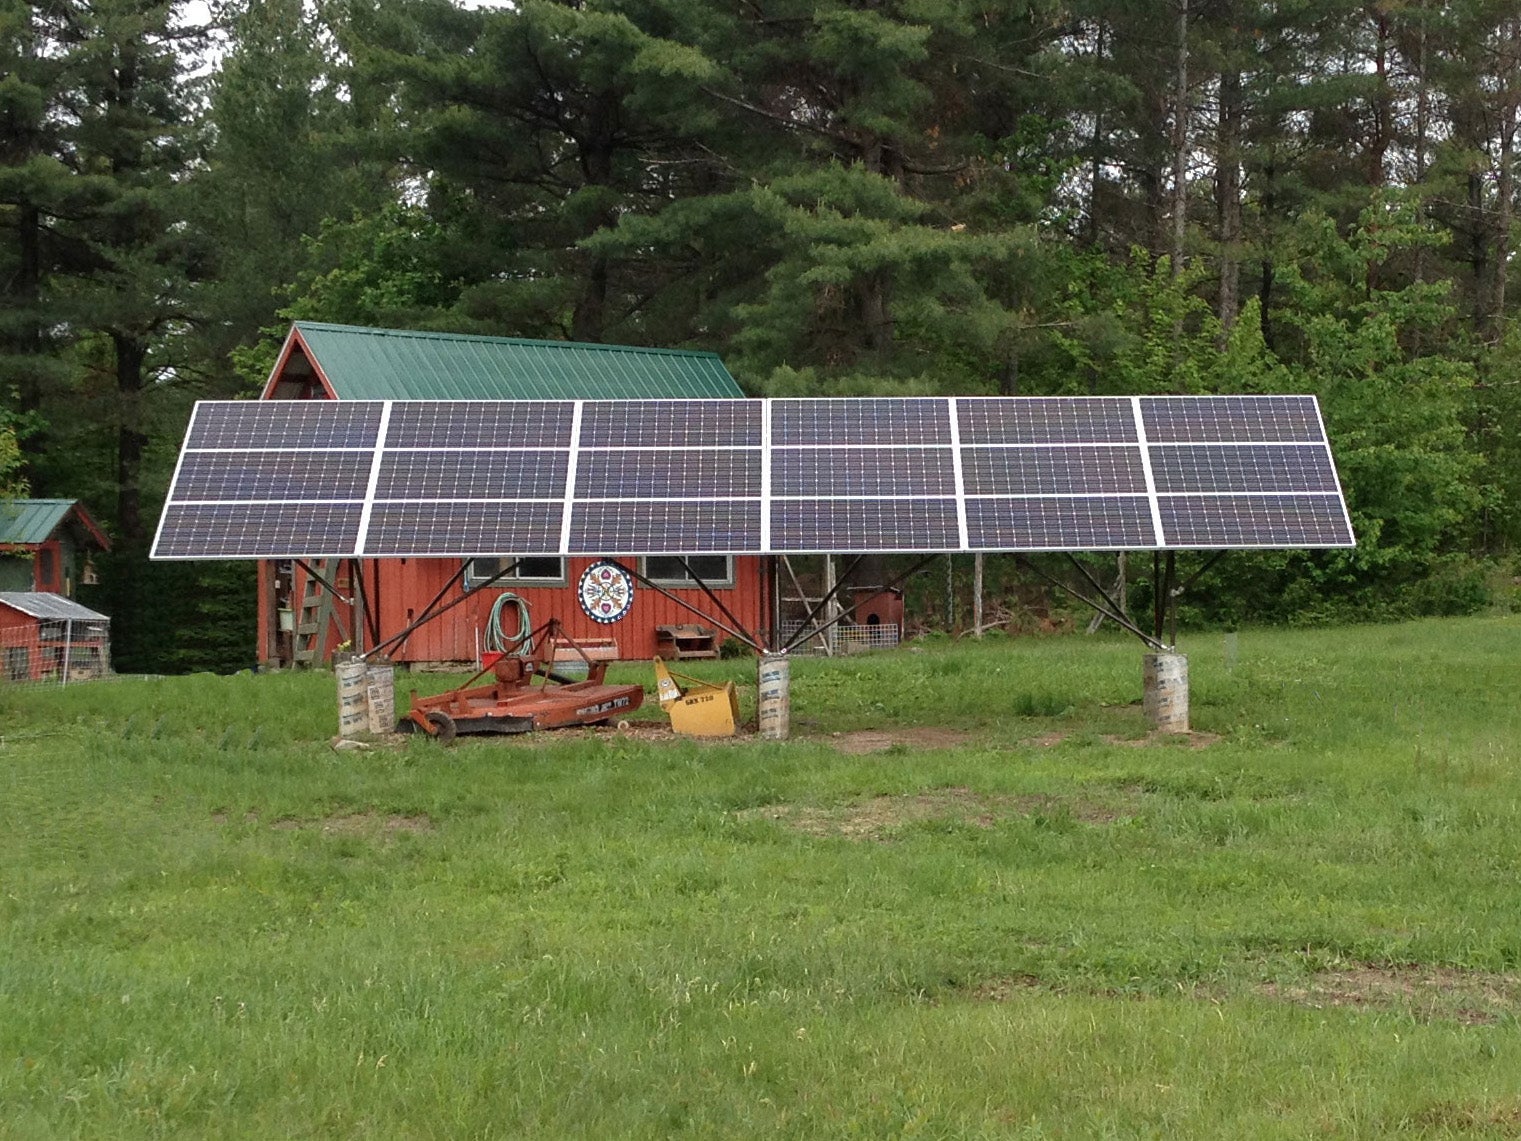 Use your solar array as lawn equipment shelter!